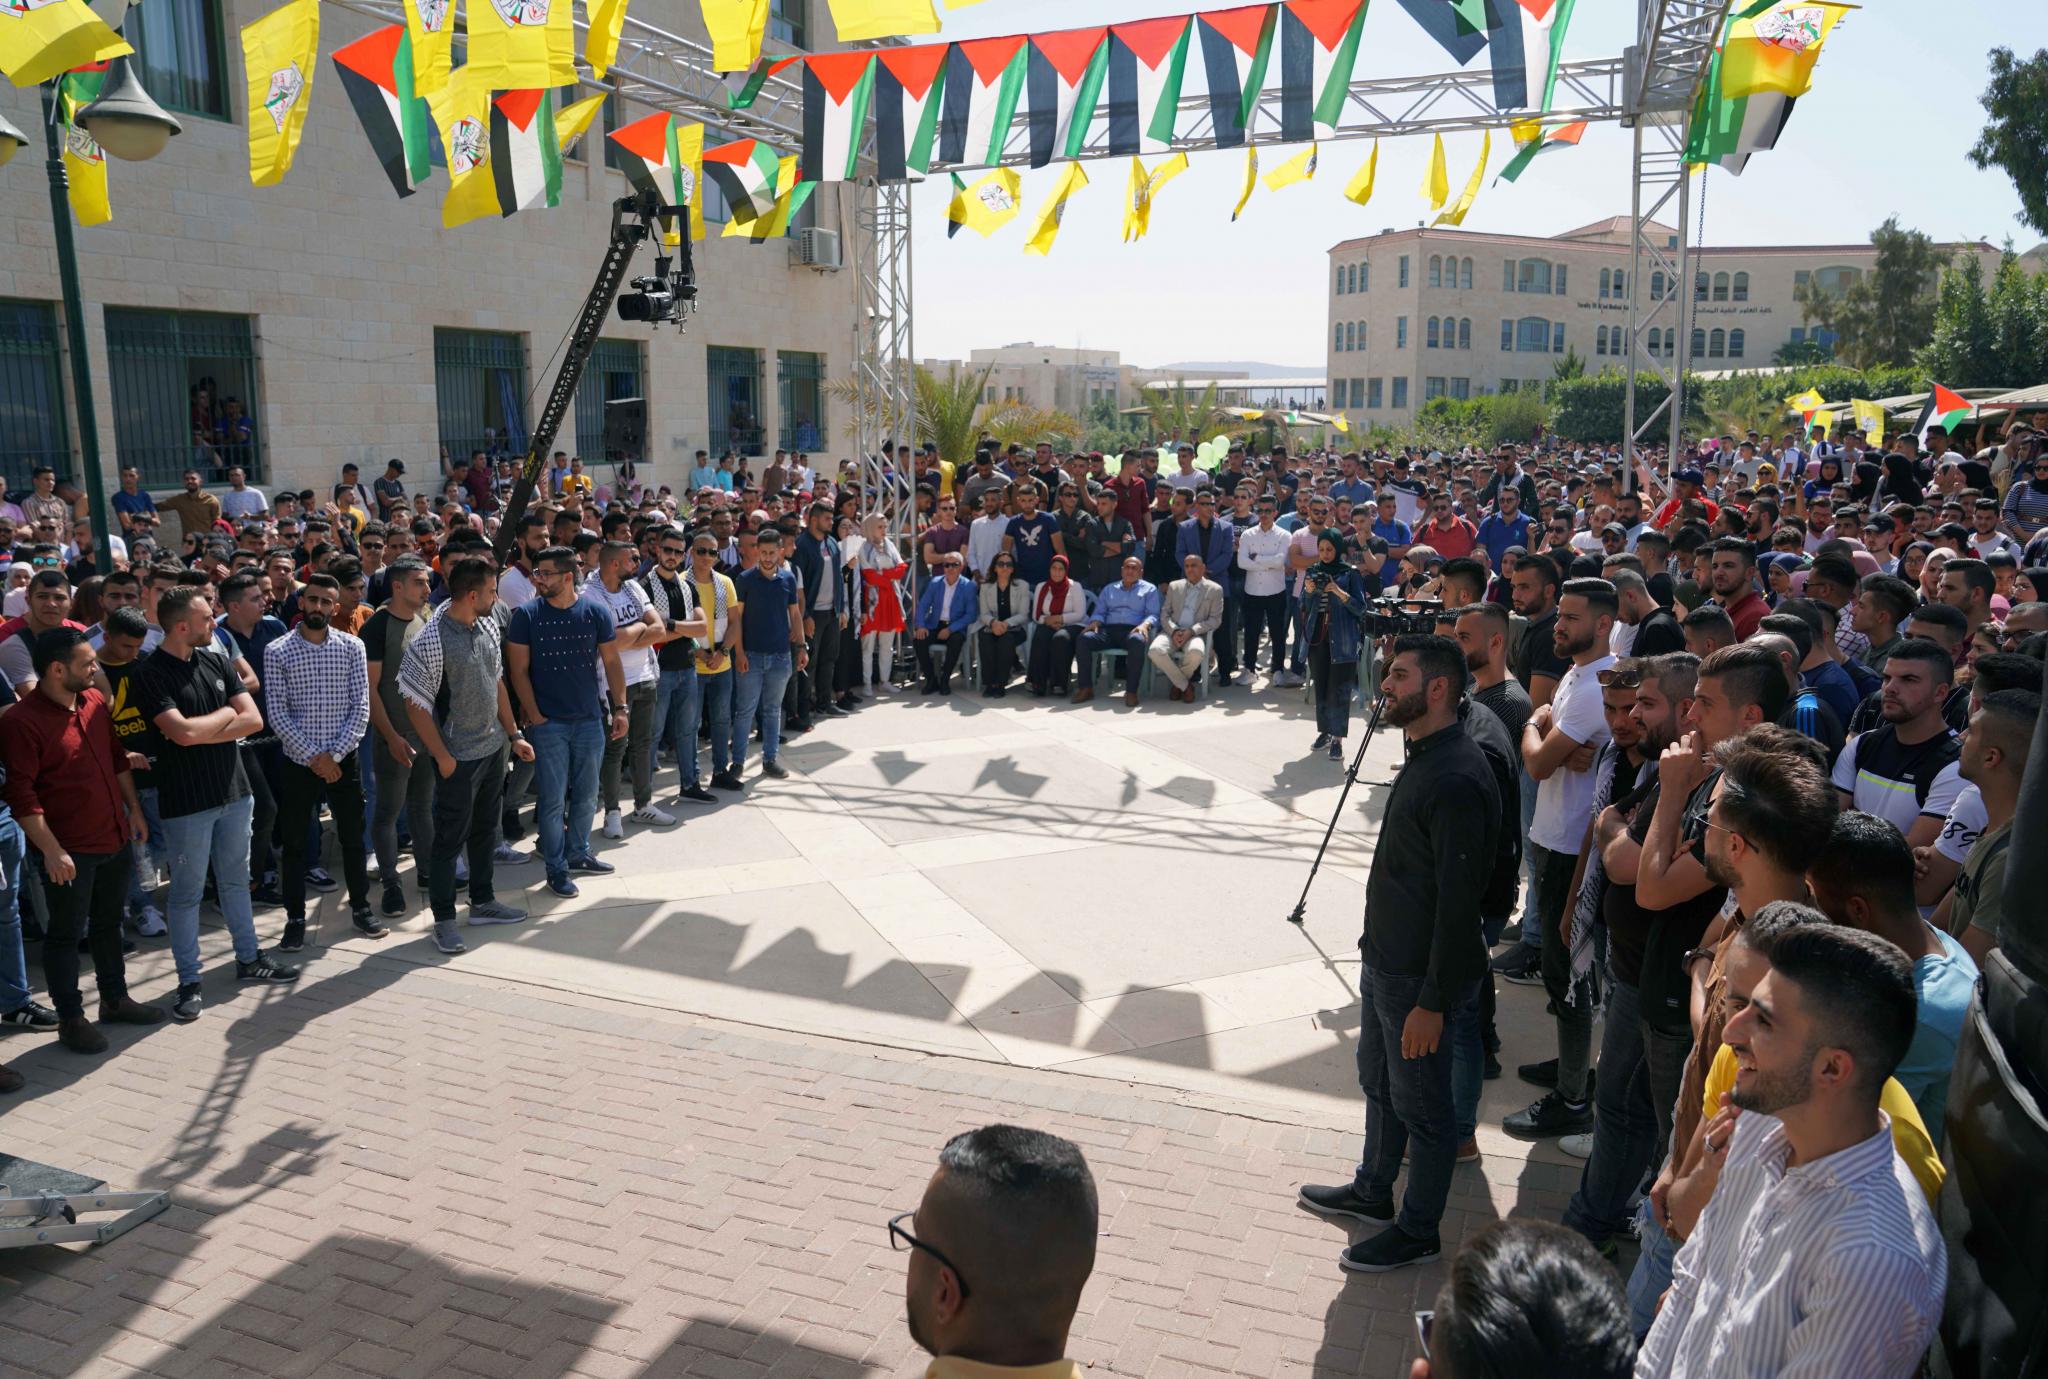 The Student Union Council at the University Organizes a Reception Welcoming the New Students for the Academic Year 2019/2020